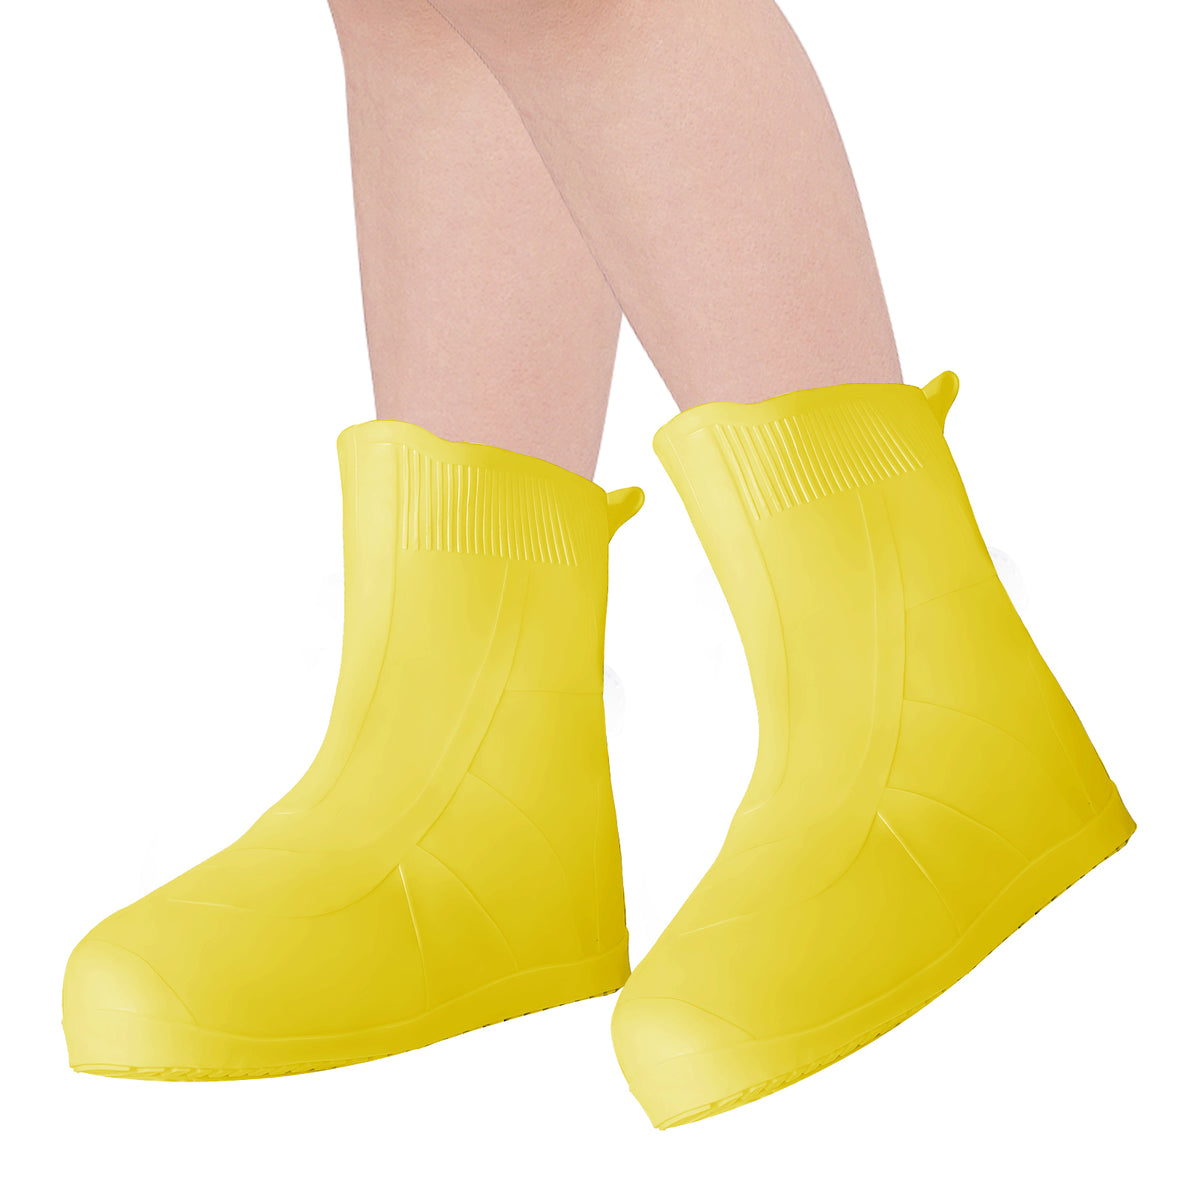 Adorila Kid Rain Silicone Shoe Covers, Anti-Slip Wear-Resistant and Portable Waterproof Shoe Covers, Kid Shoe Covers for Outdoor Home Travel Rain Boots (Yellow, M)